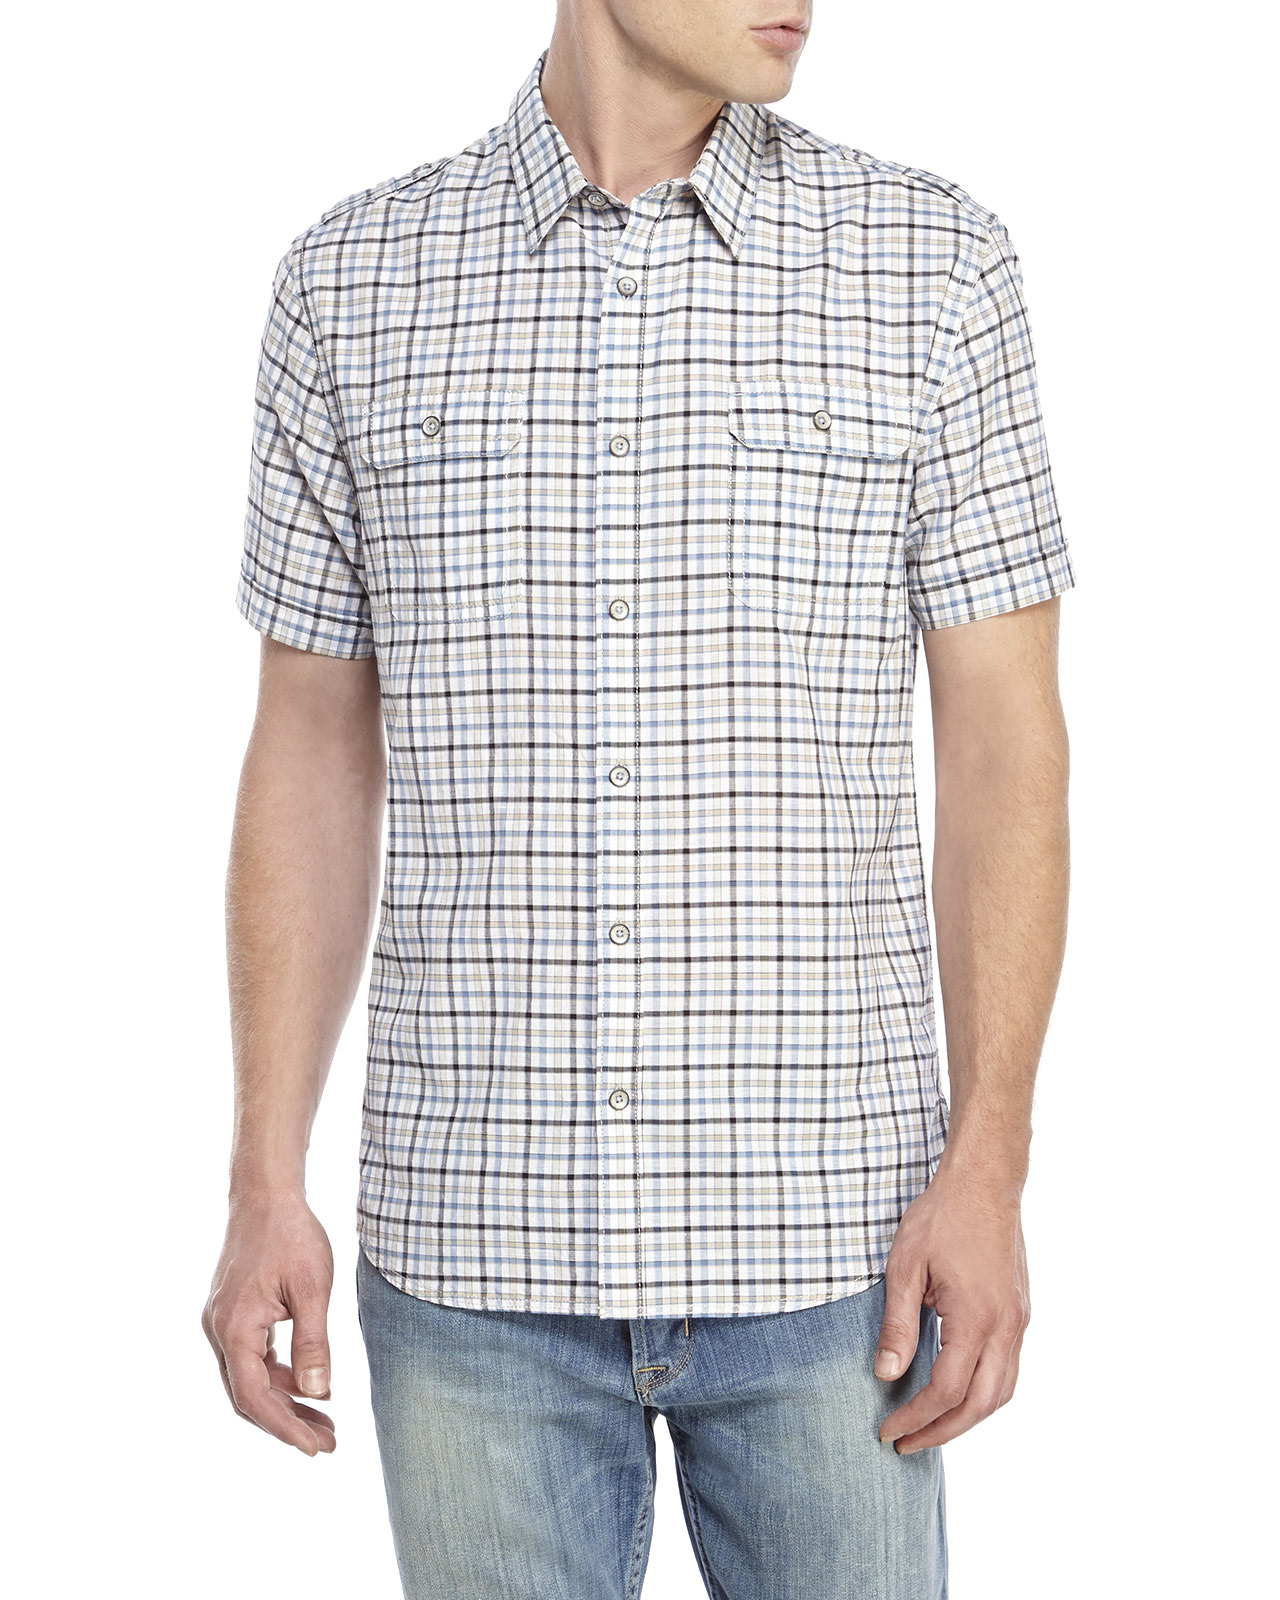 Lyst - Dkny Cotton Linen Check Shirt in Blue for Men